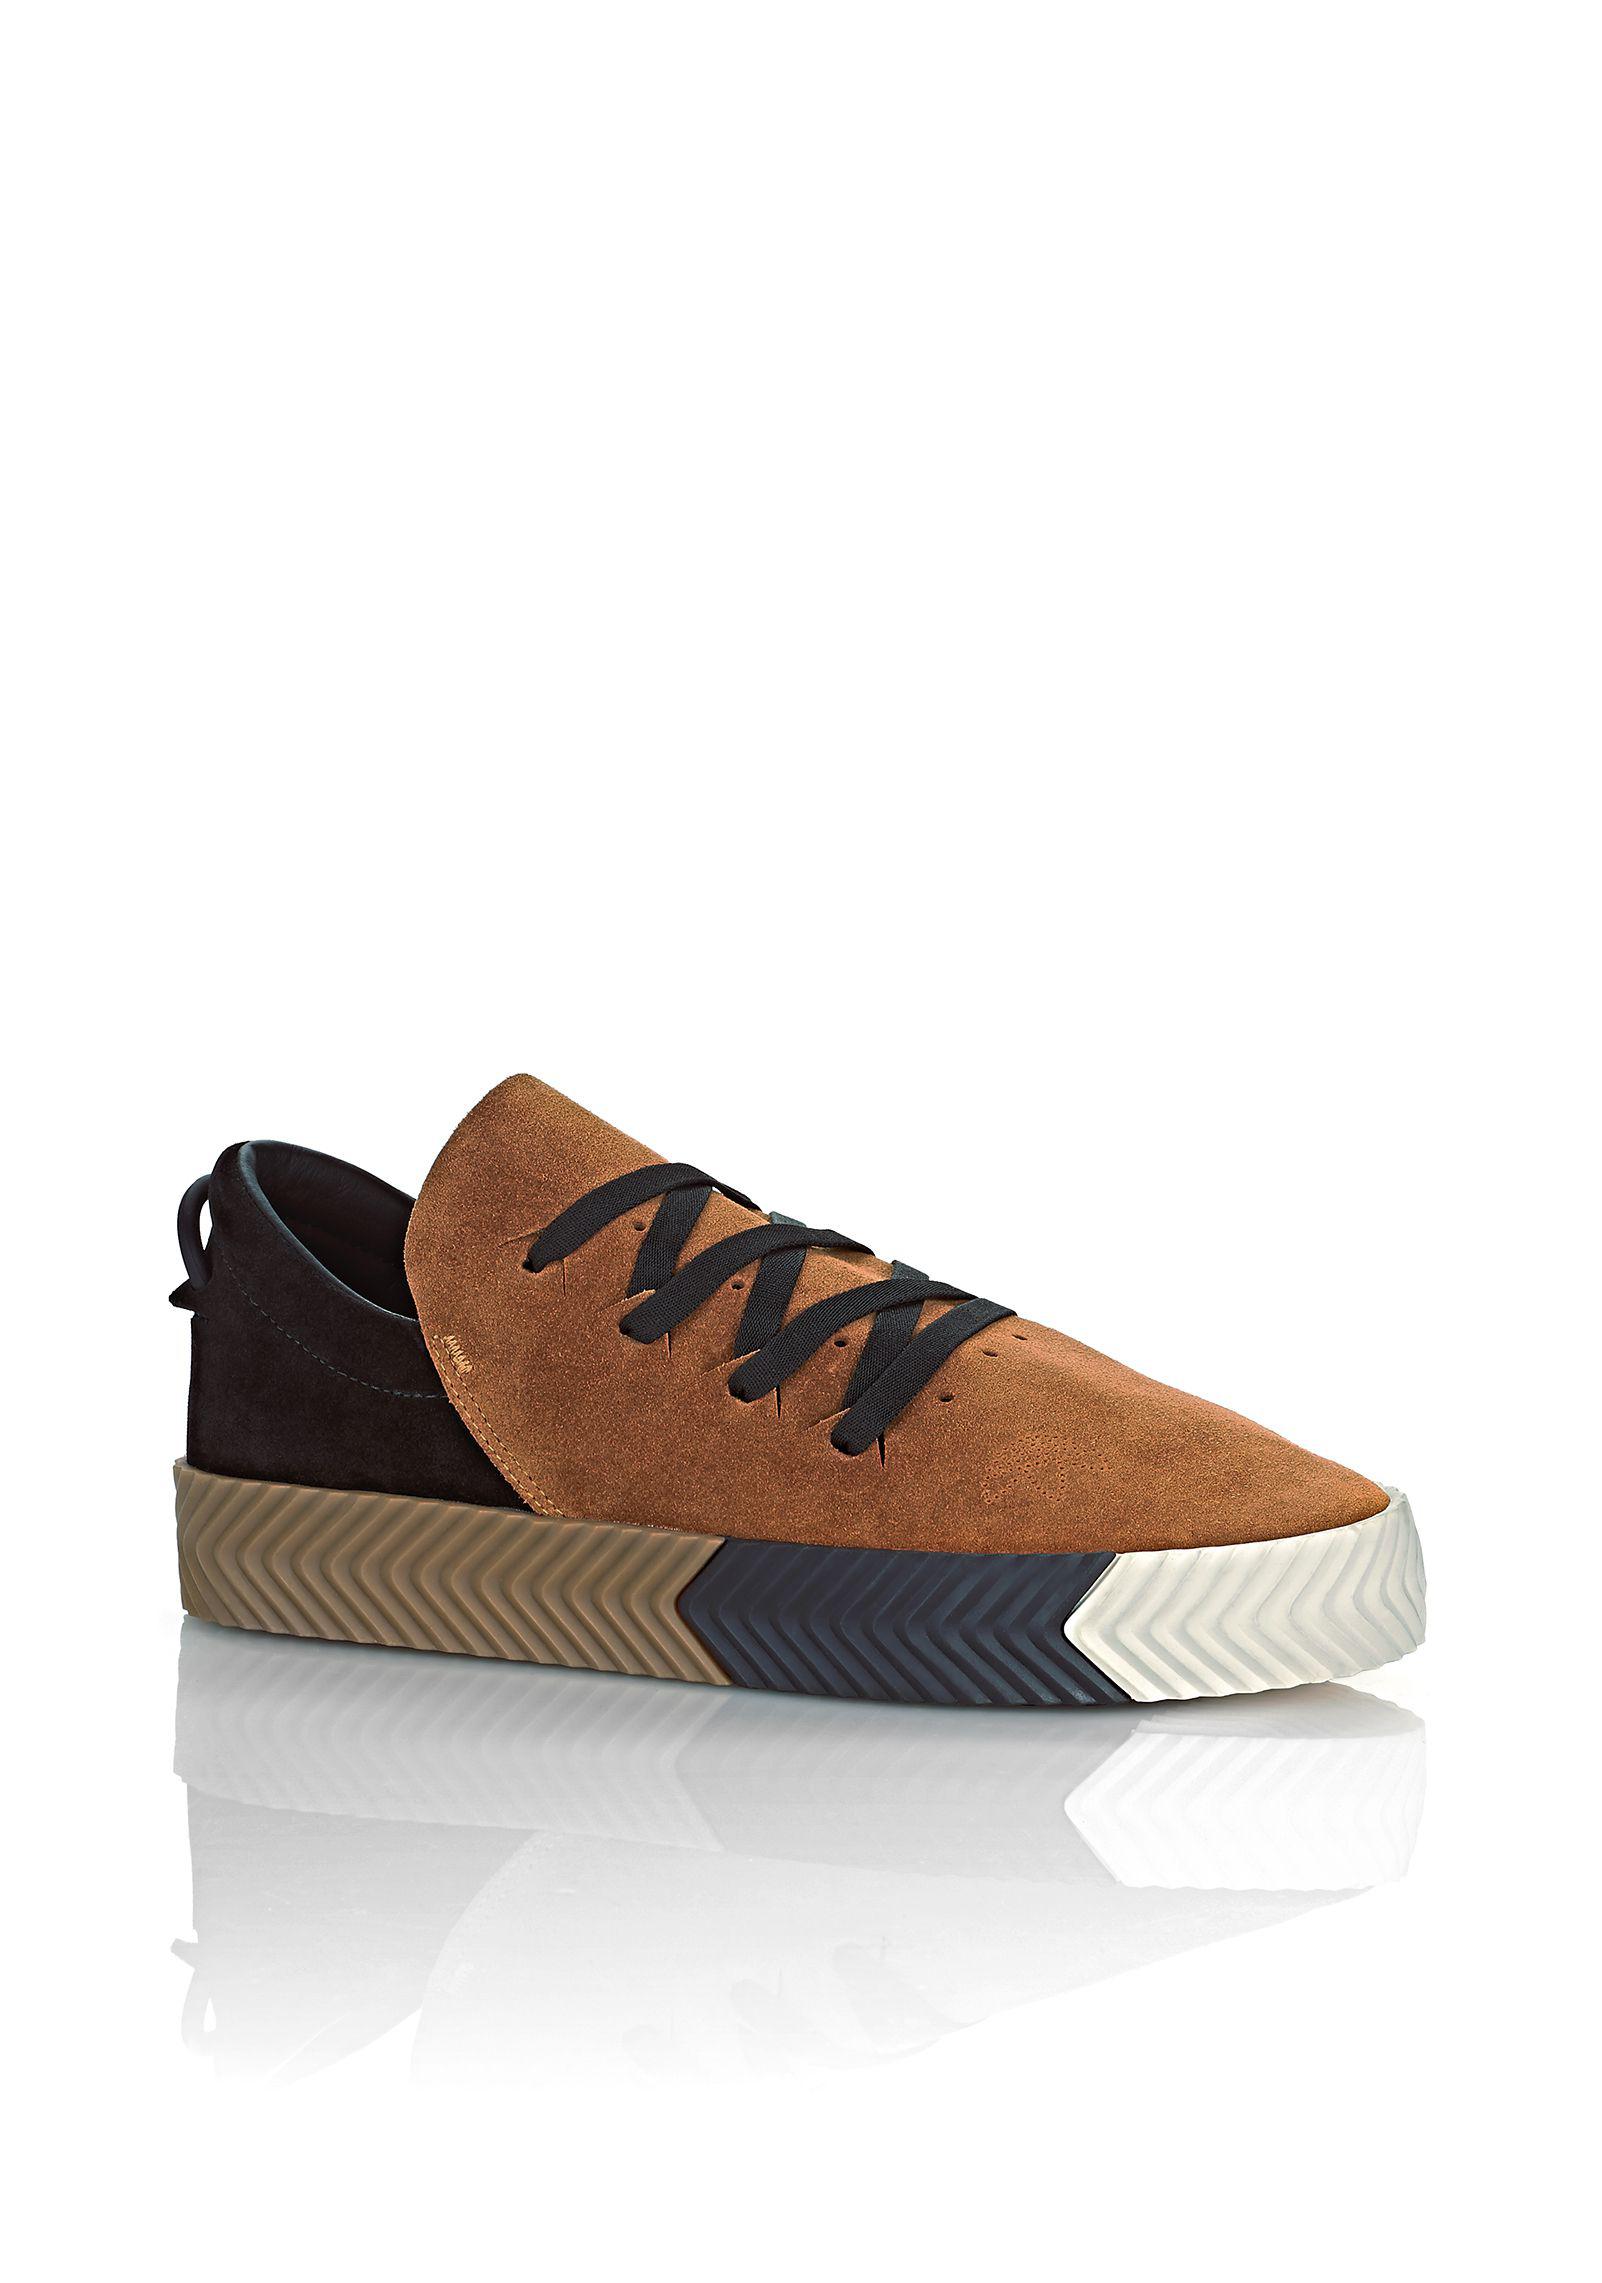 Alexander Wang Leather Adidas Originals By Aw Skate Shoes | Lyst